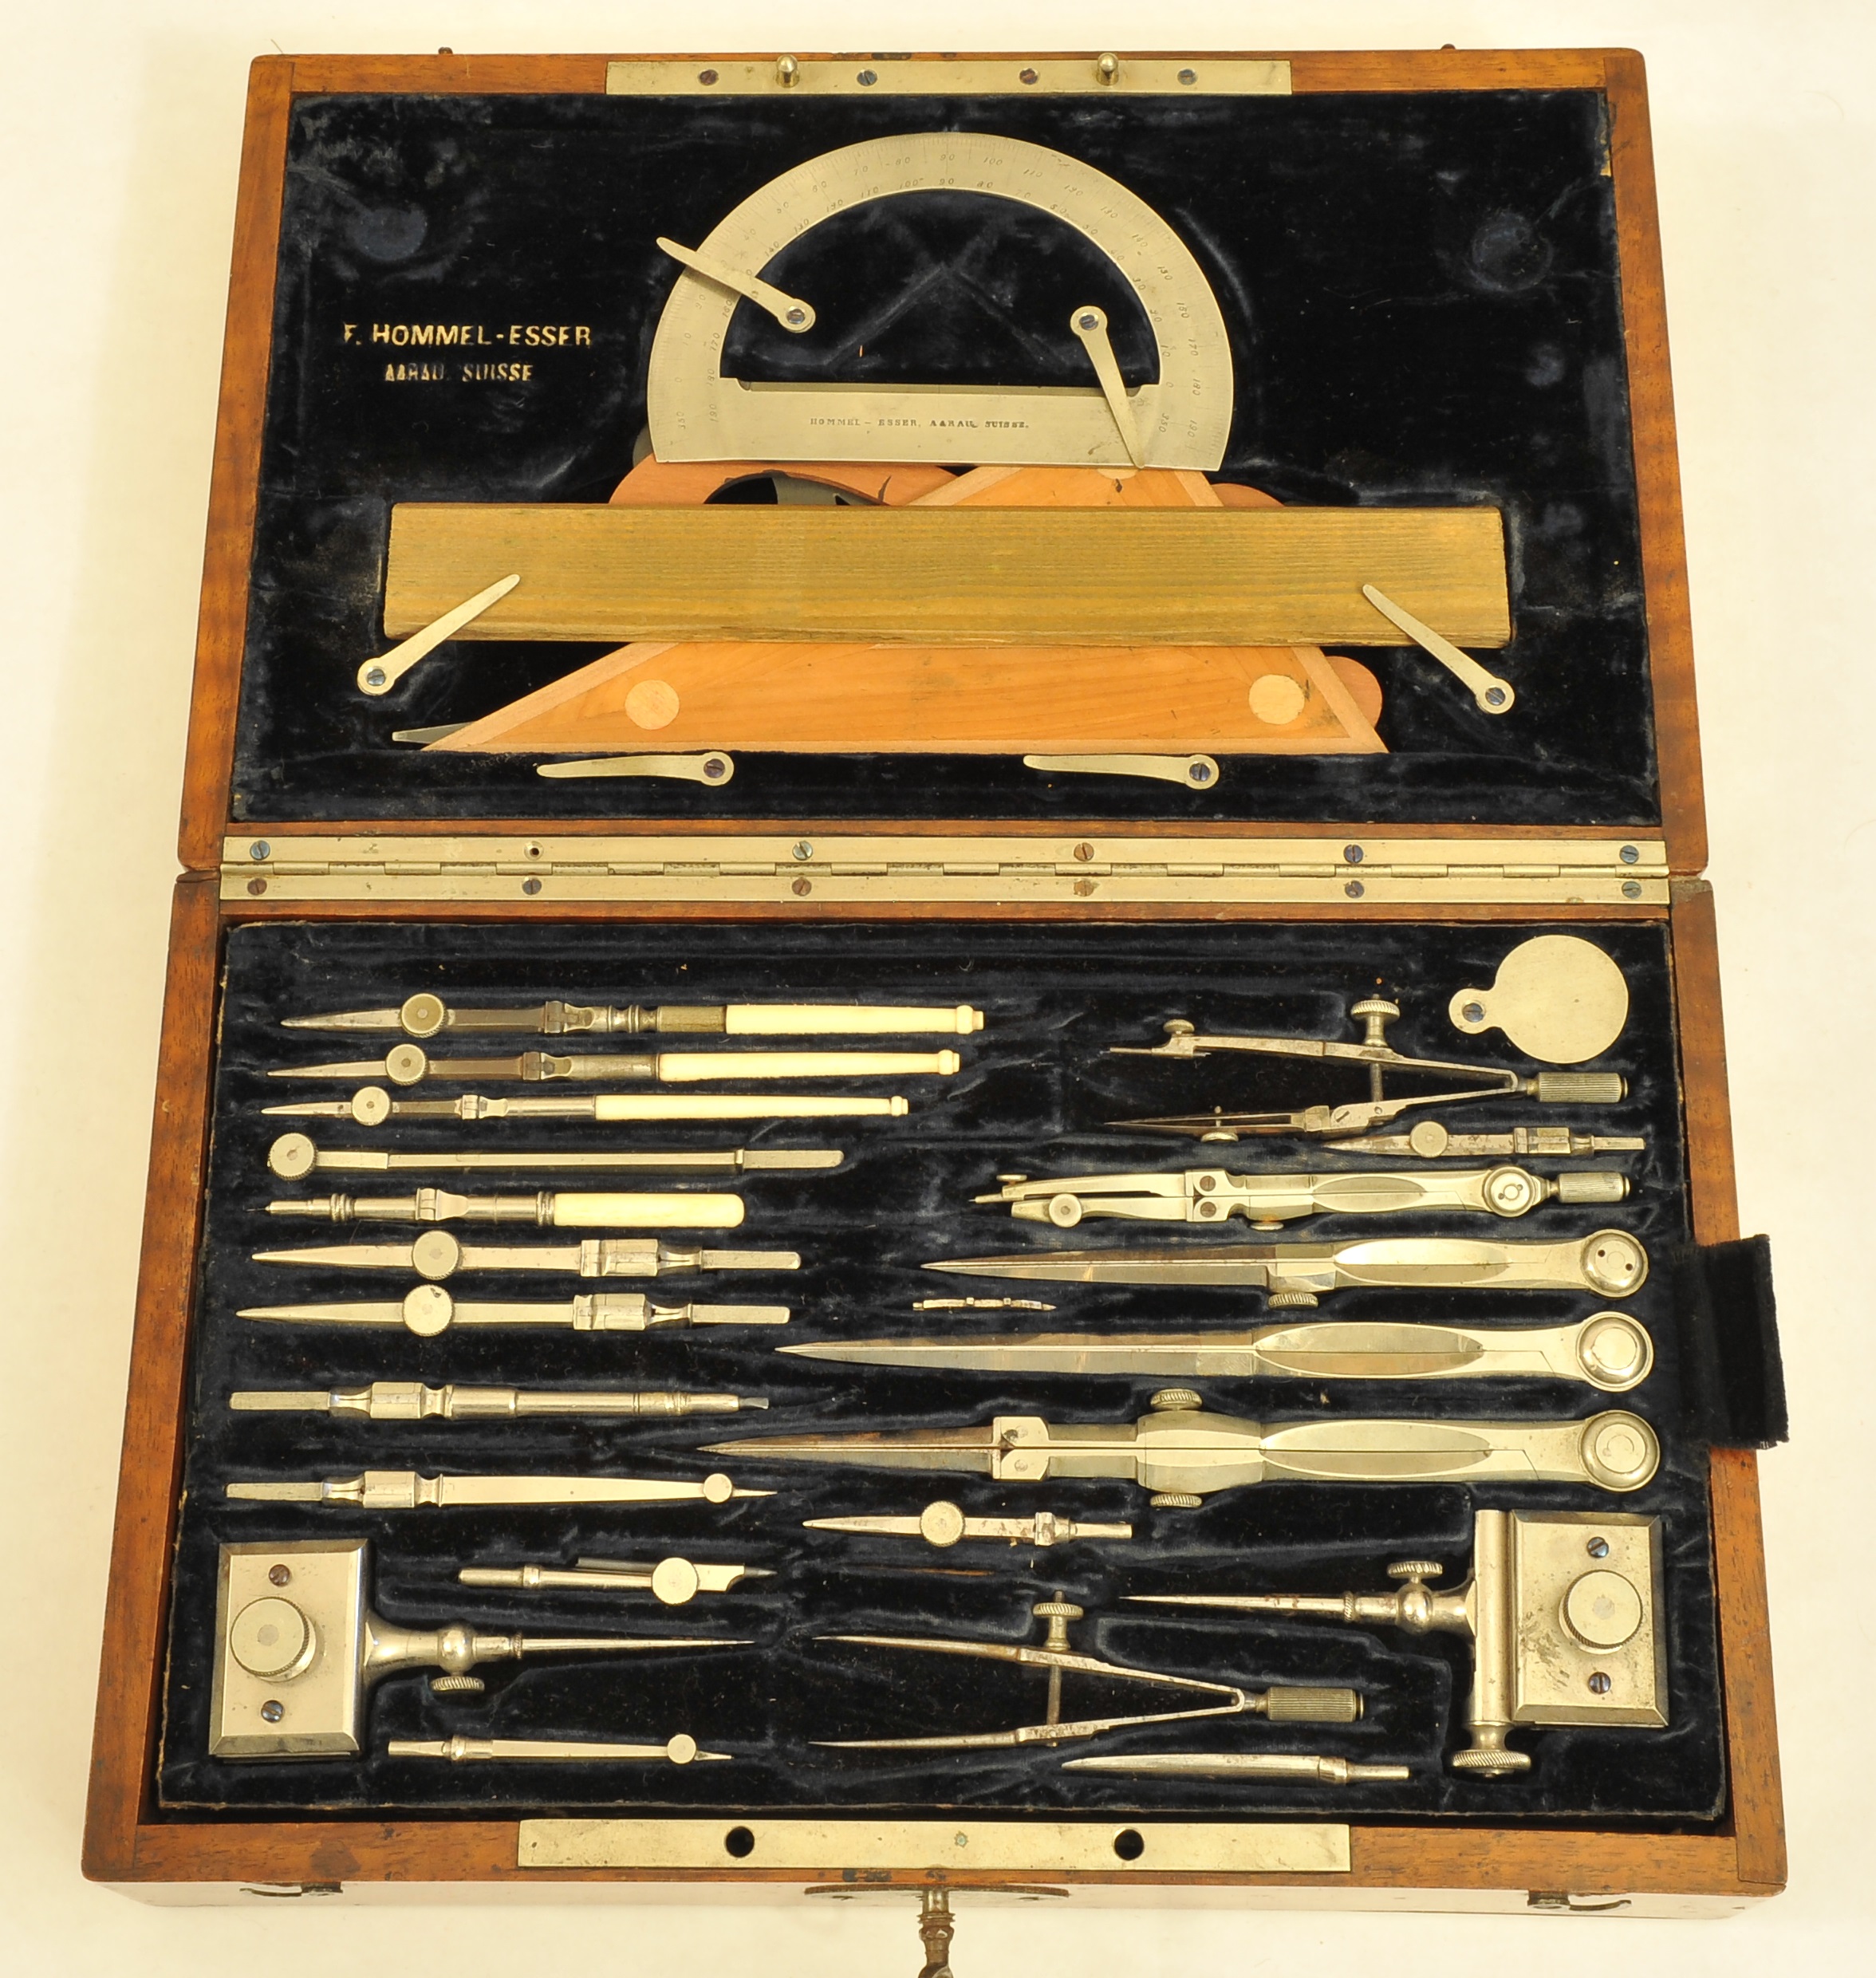 A Great Architect Drawing Instruments Set made by Hommel & Esser Aarau